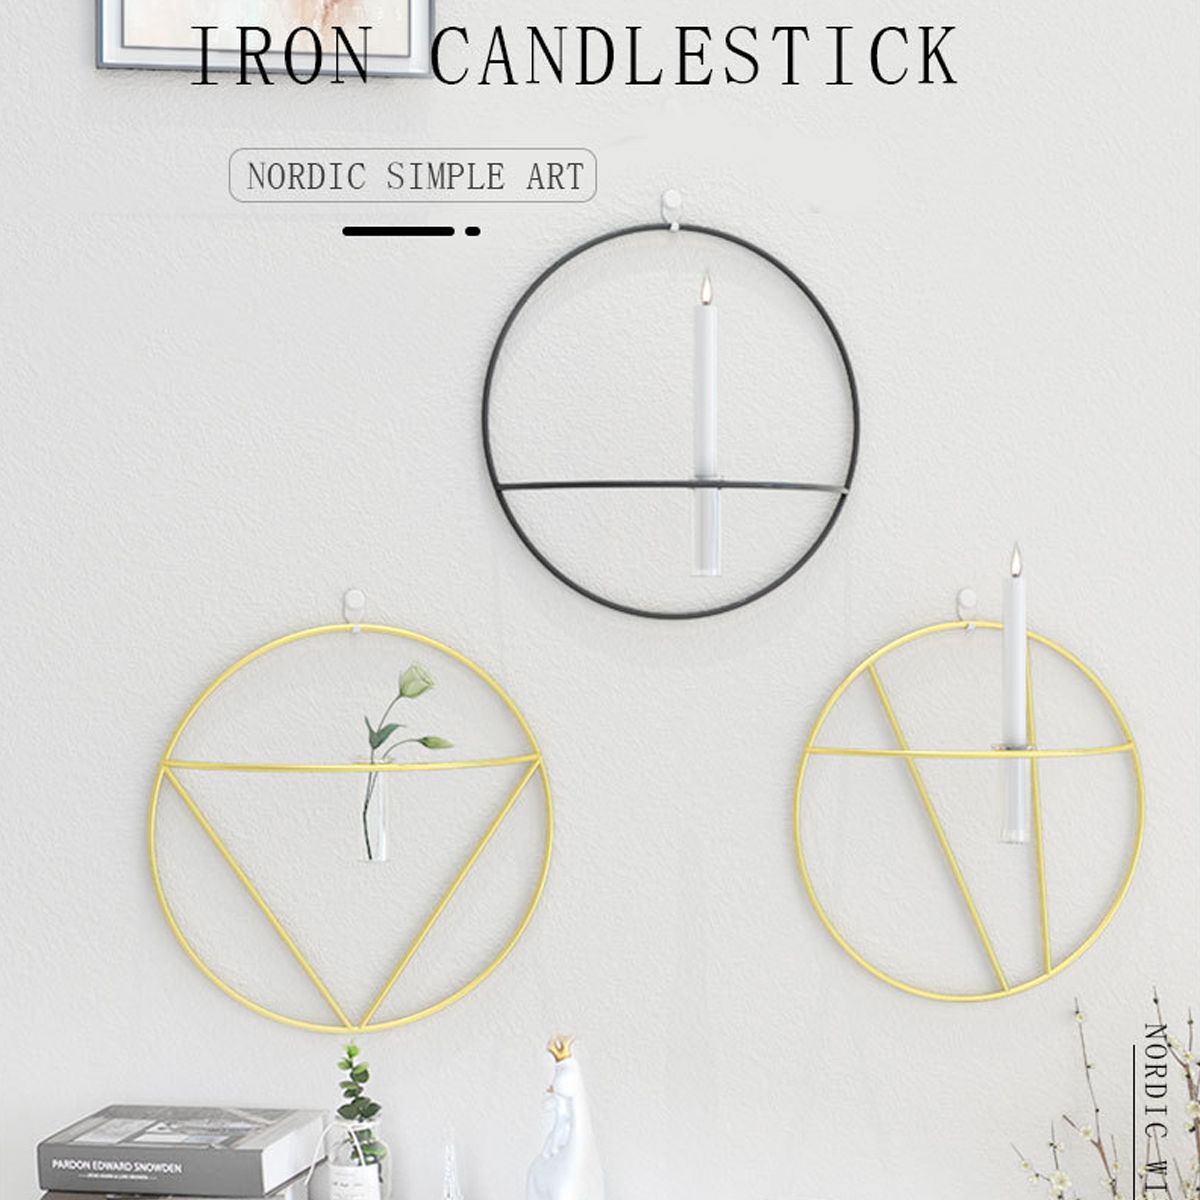 Nordic-Style-3D-Geometric-Candlestick-Metal-Wall-Candle-Holder-Home-Crafts-1727267